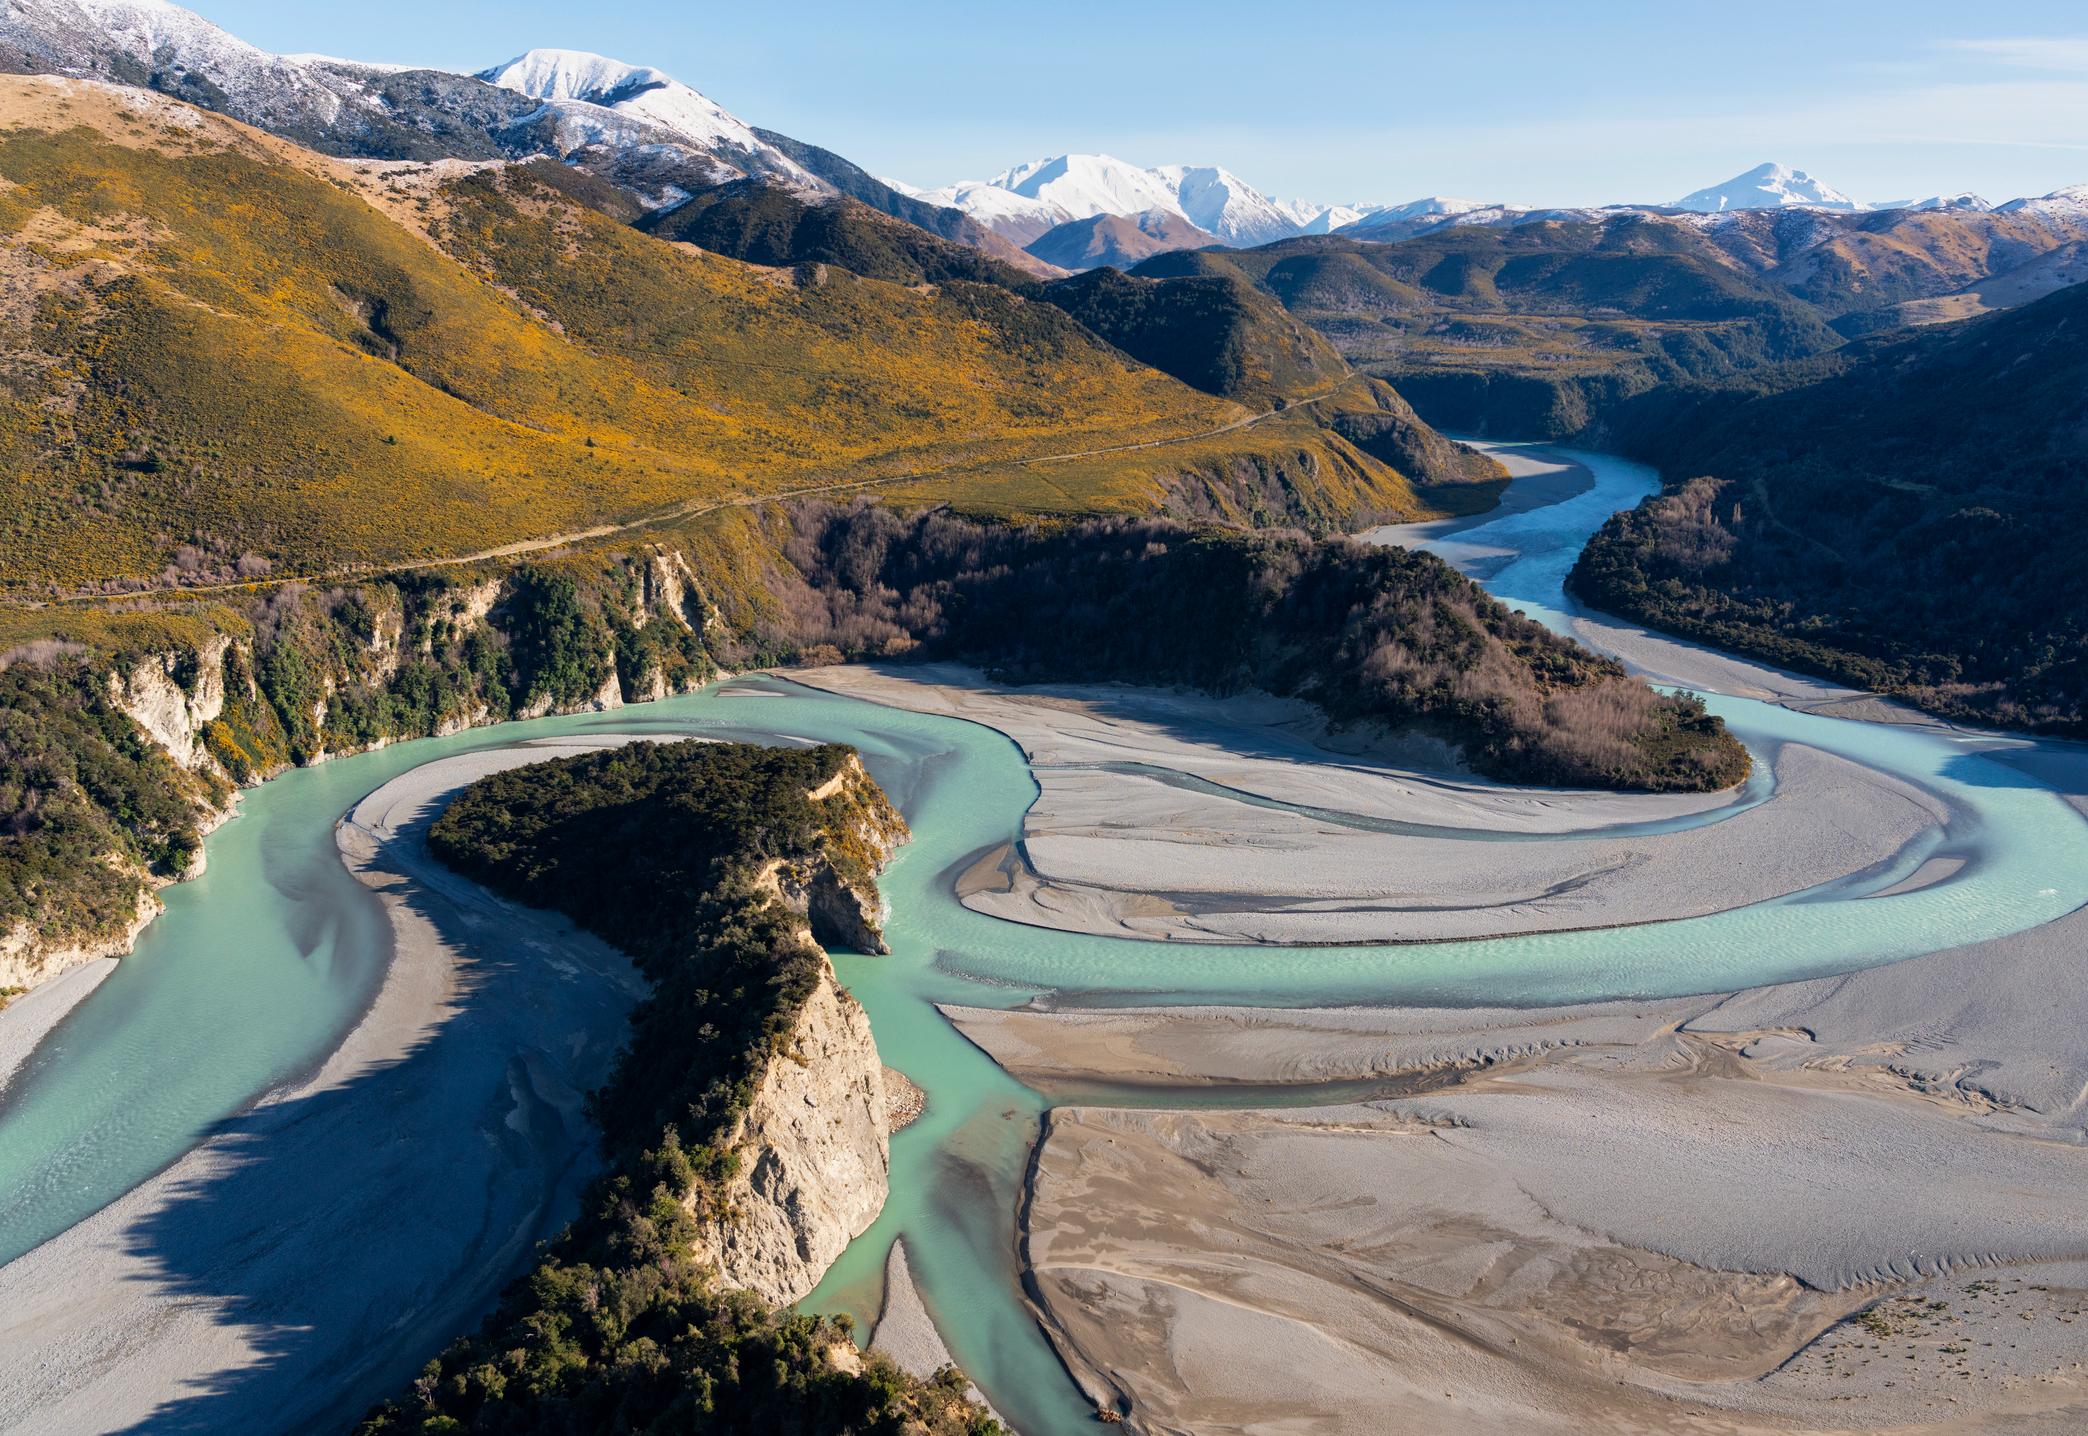 The Waimakiri River with the Southern Alps behind. Photo: Getty.